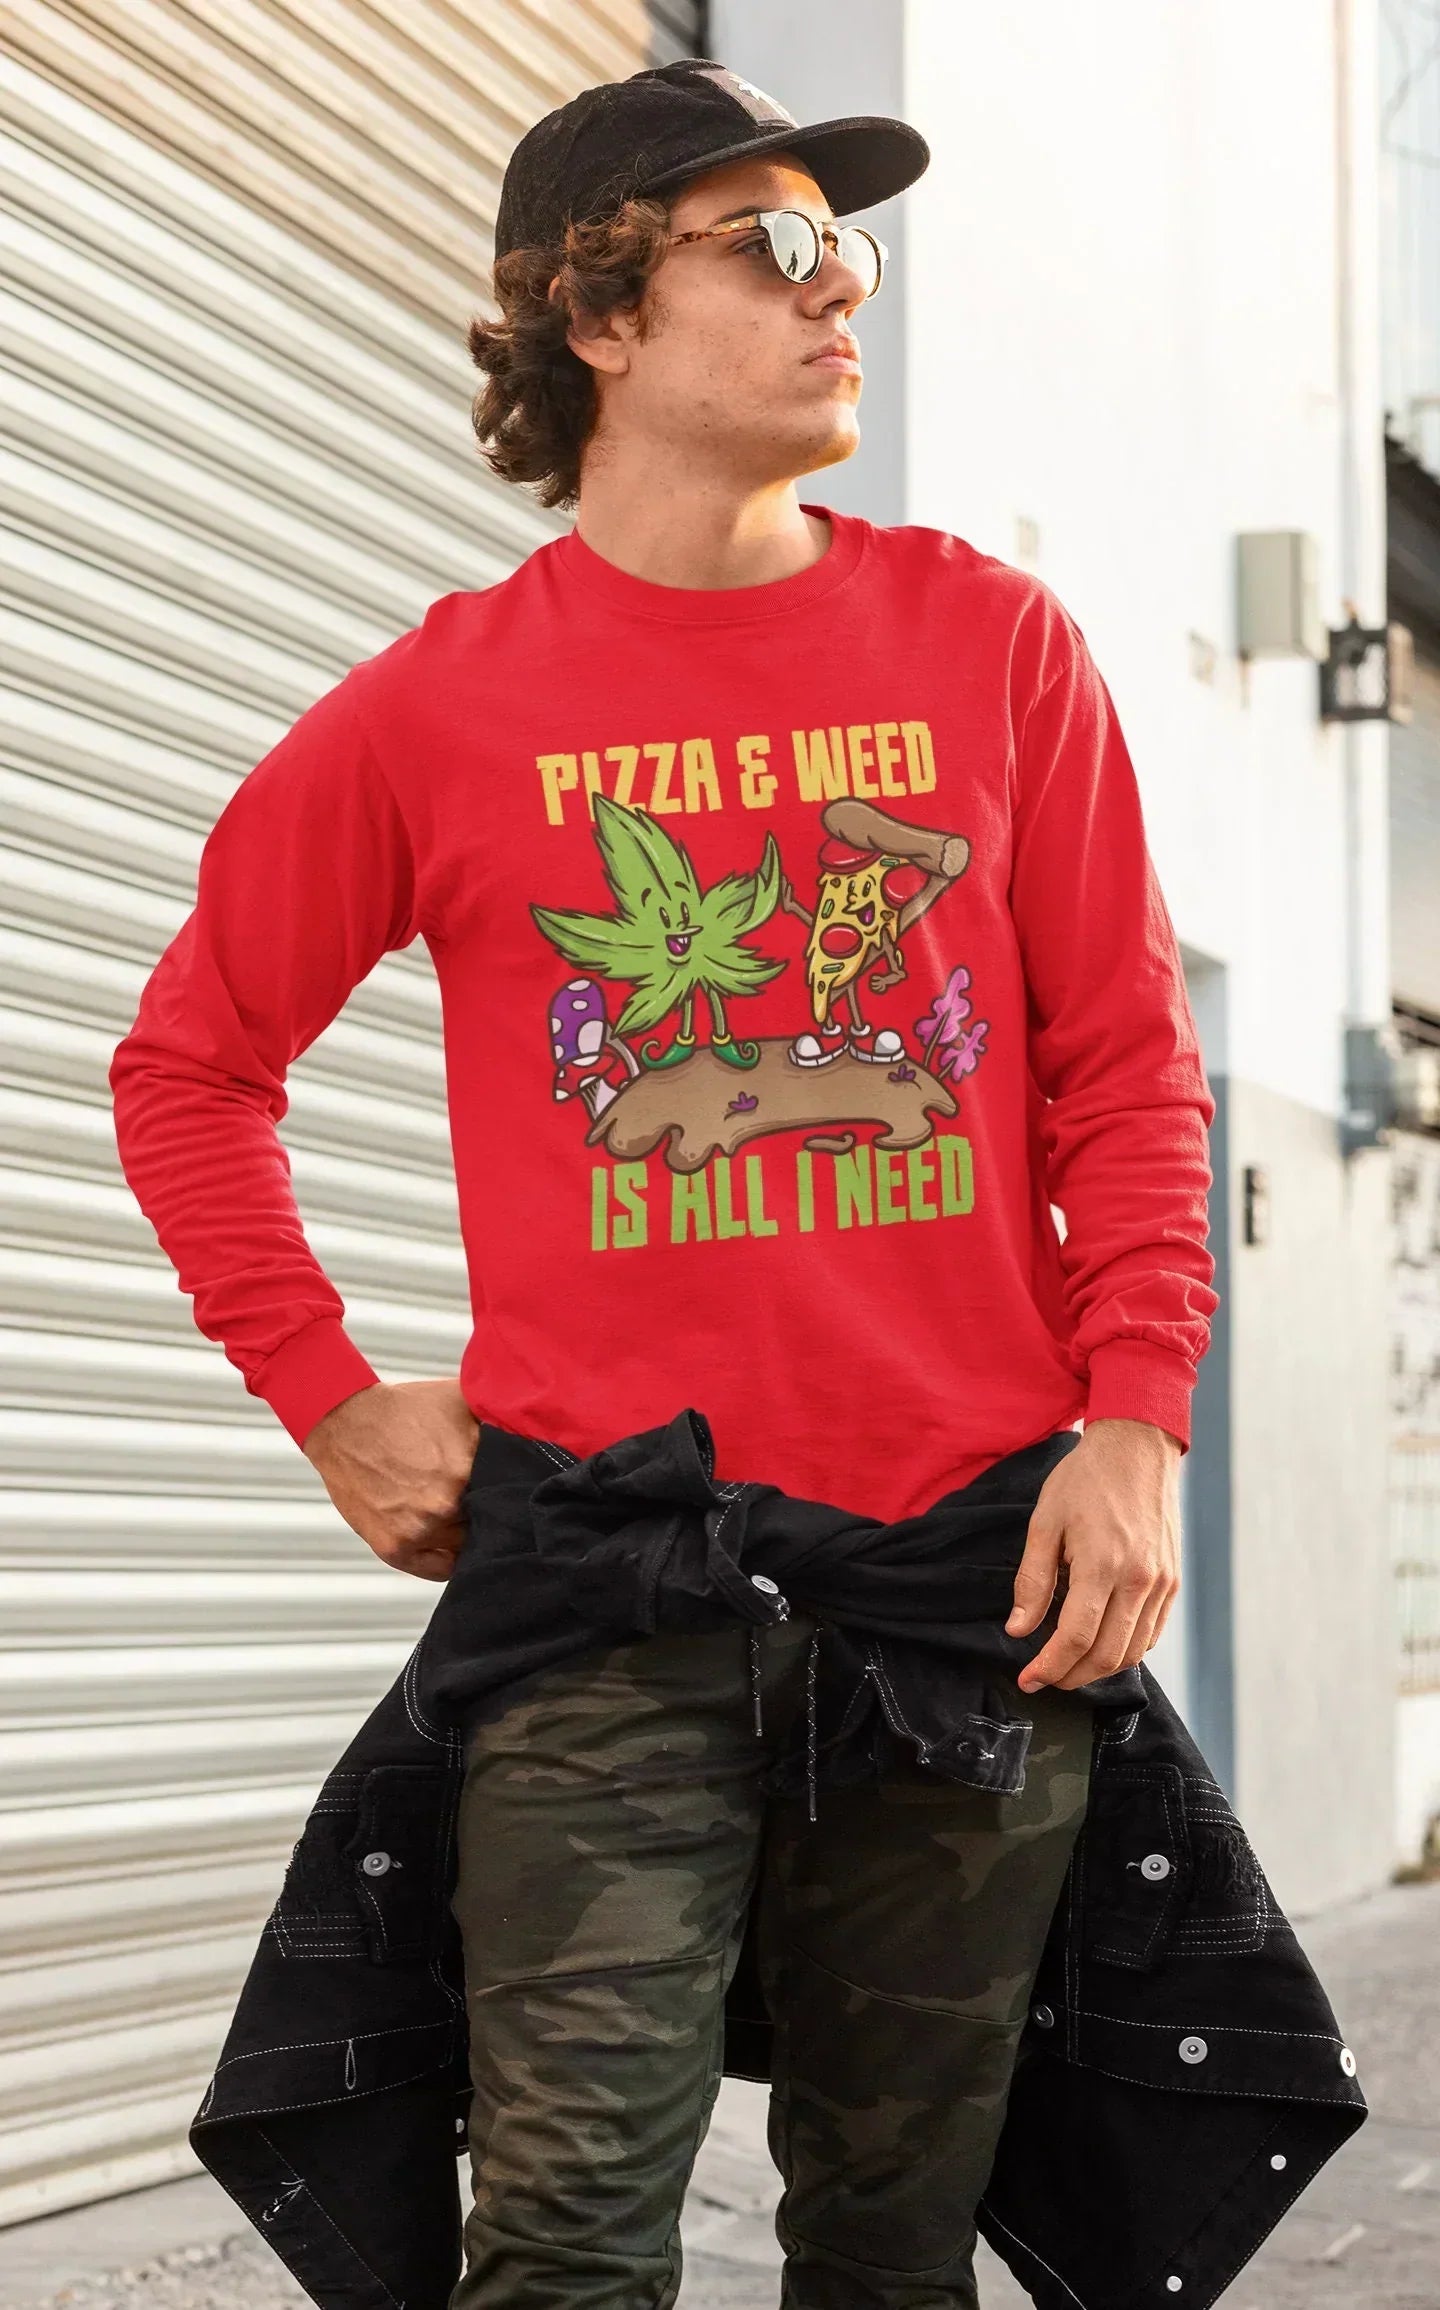 Pizza and Beer is All I Need, Funny Stoner Shirt HMDesignStudioUS